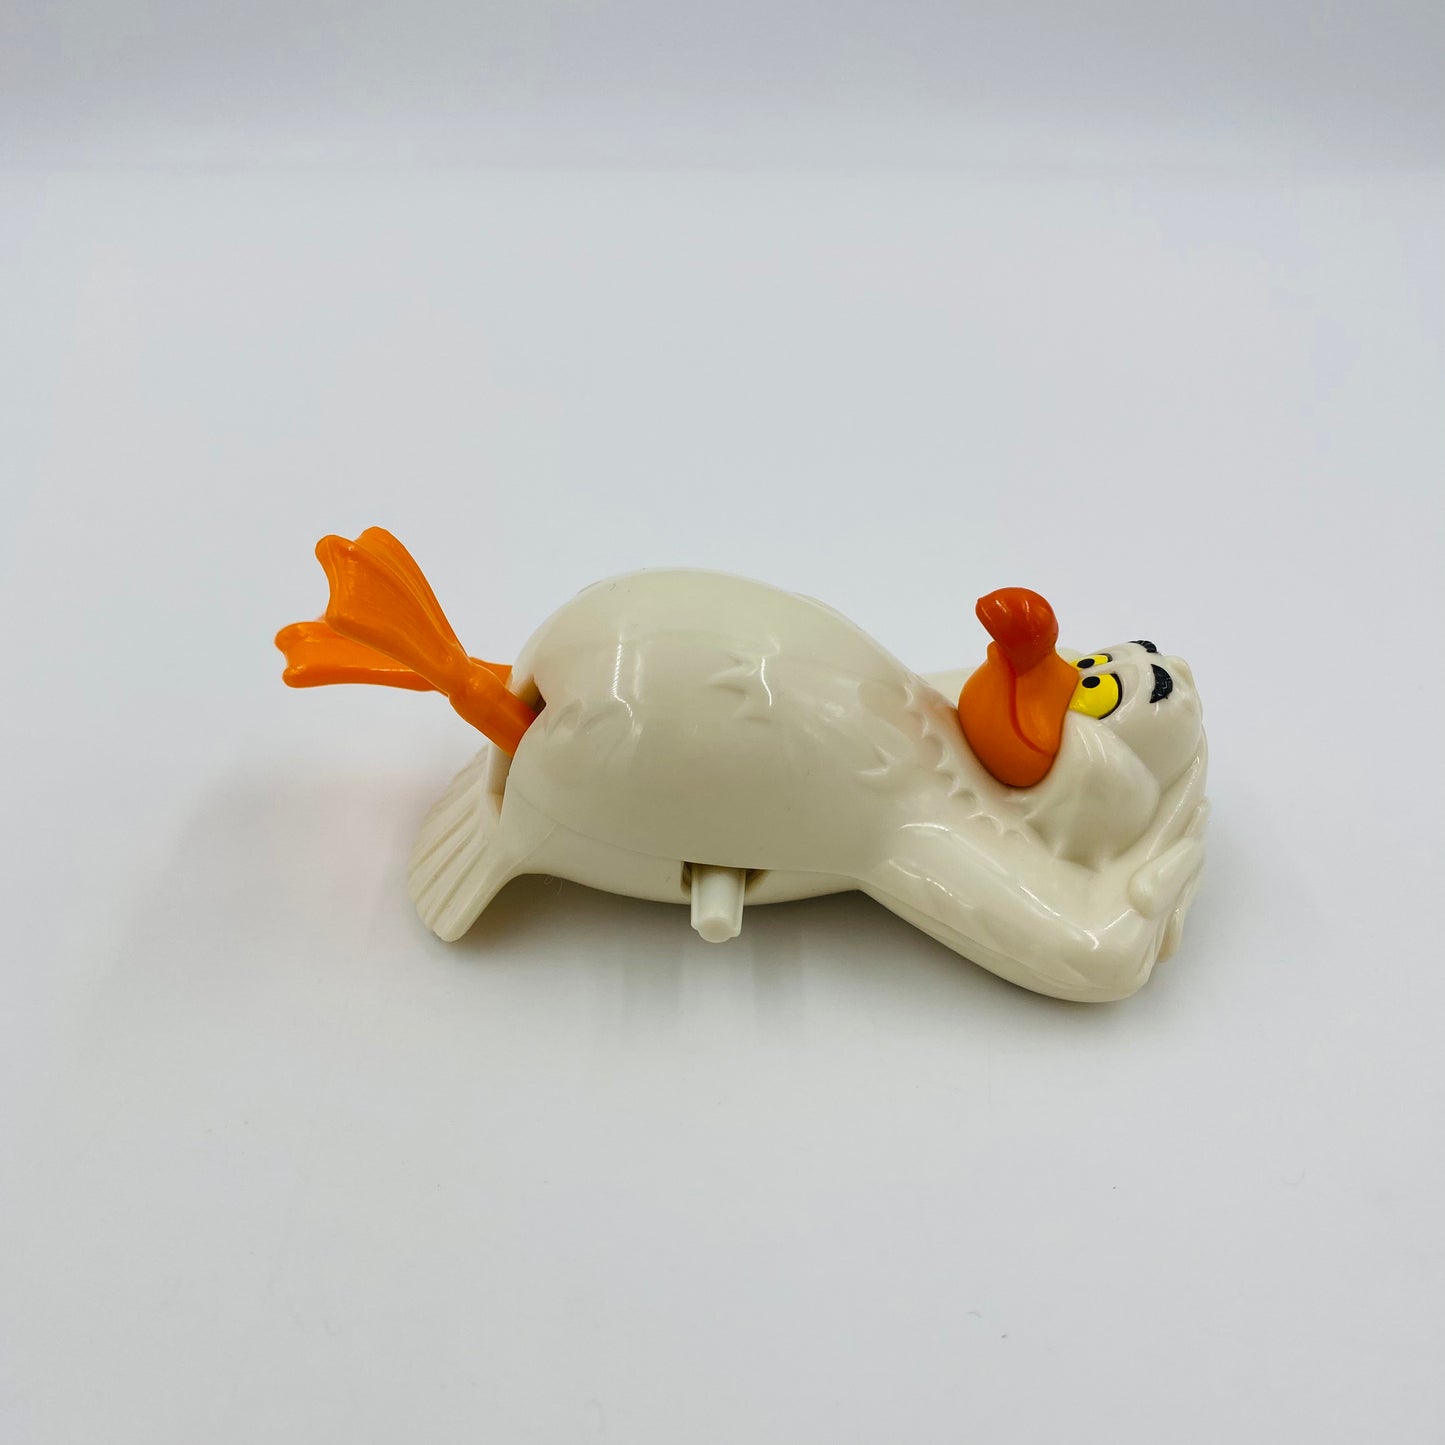 Little Mermaid Scuttle McDonald's Happy Meal wind up toy (1996) loose